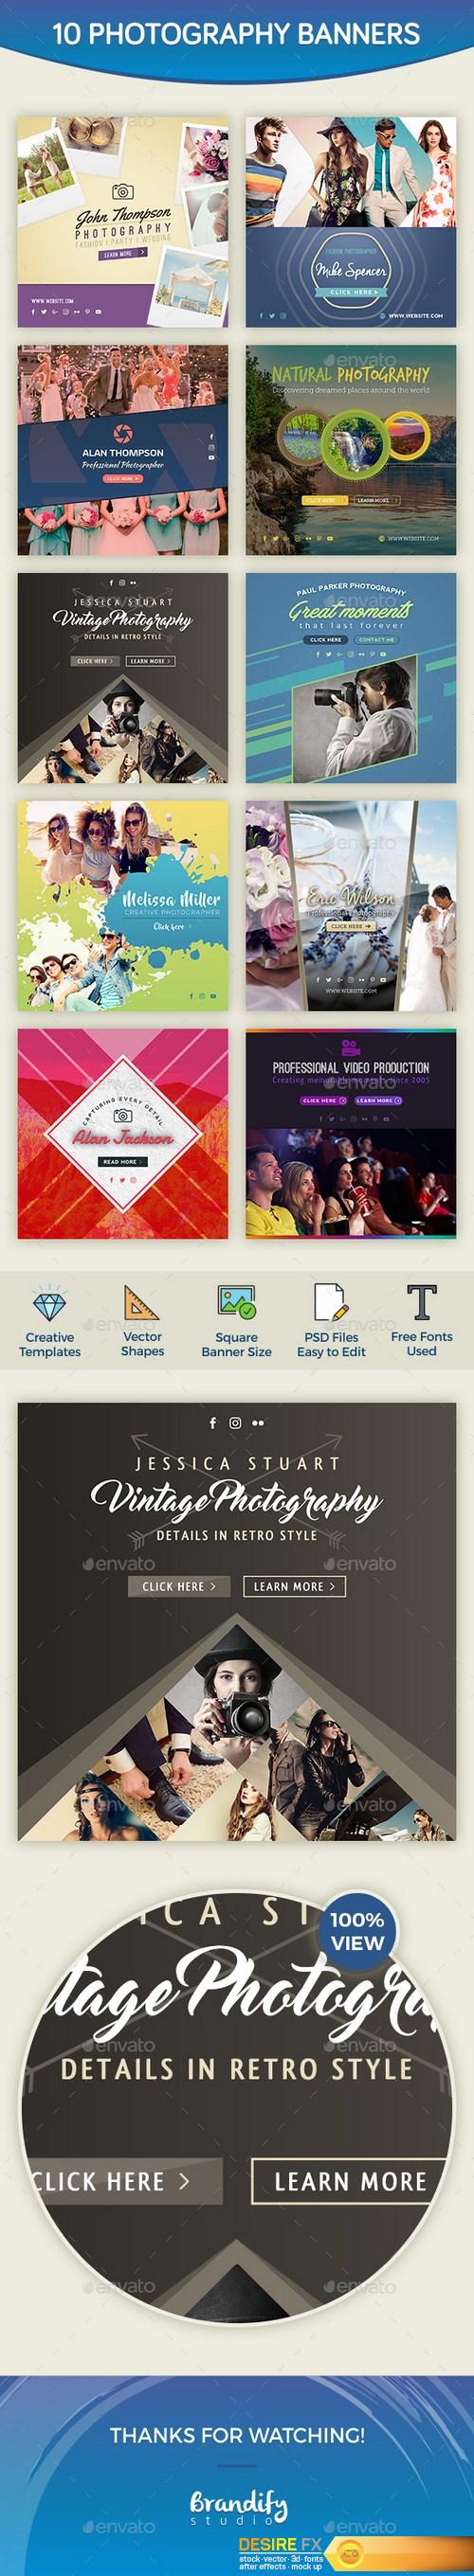 GraphicRiver Photography Banners 18893389